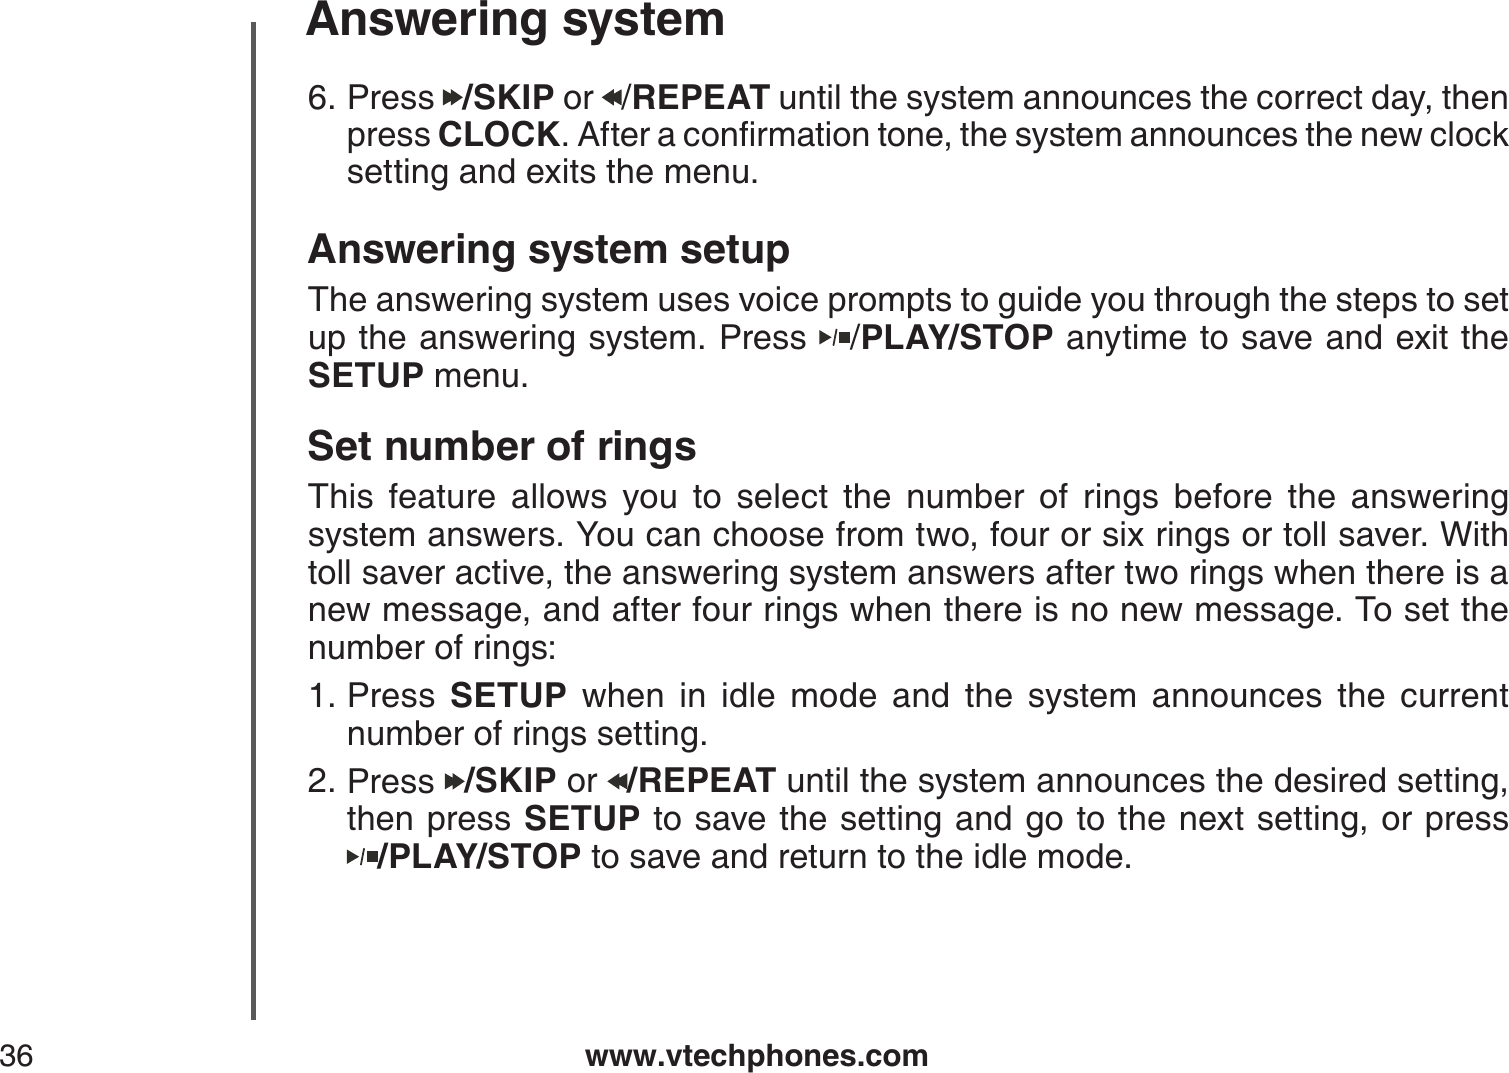 www.vtechphones.com36Answering systemAnswering system setupThe answering system uses voice prompts to guide you through the steps to set up the answering system. Press  /PLAY/STOP anytime to save and exit the SETUP menu. Set number of ringsThis feature allows you to select the number of rings before the answering system answers. You can choose from two, four or six rings or toll saver. With toll saver active, the answering system answers after two rings when there is a new message, and after four rings when there is no new message. To set the number of rings:Press  SETUP when in idle mode and the system announces the current number of rings setting.Press  /SKIP or  /REPEAT until the system announces the desired setting, then press SETUP to save the setting and go to the next setting, or press      /PLAY/STOP to save and return to the idle mode.1.2.Press  /SKIP or  /REPEAT until the system announces the correct day, then press CLOCK#HVGTCEQPſTOCVKQPVQPGVJGU[UVGOCPPQWPEGUVJGPGYENQEMsetting and exits the menu.6.